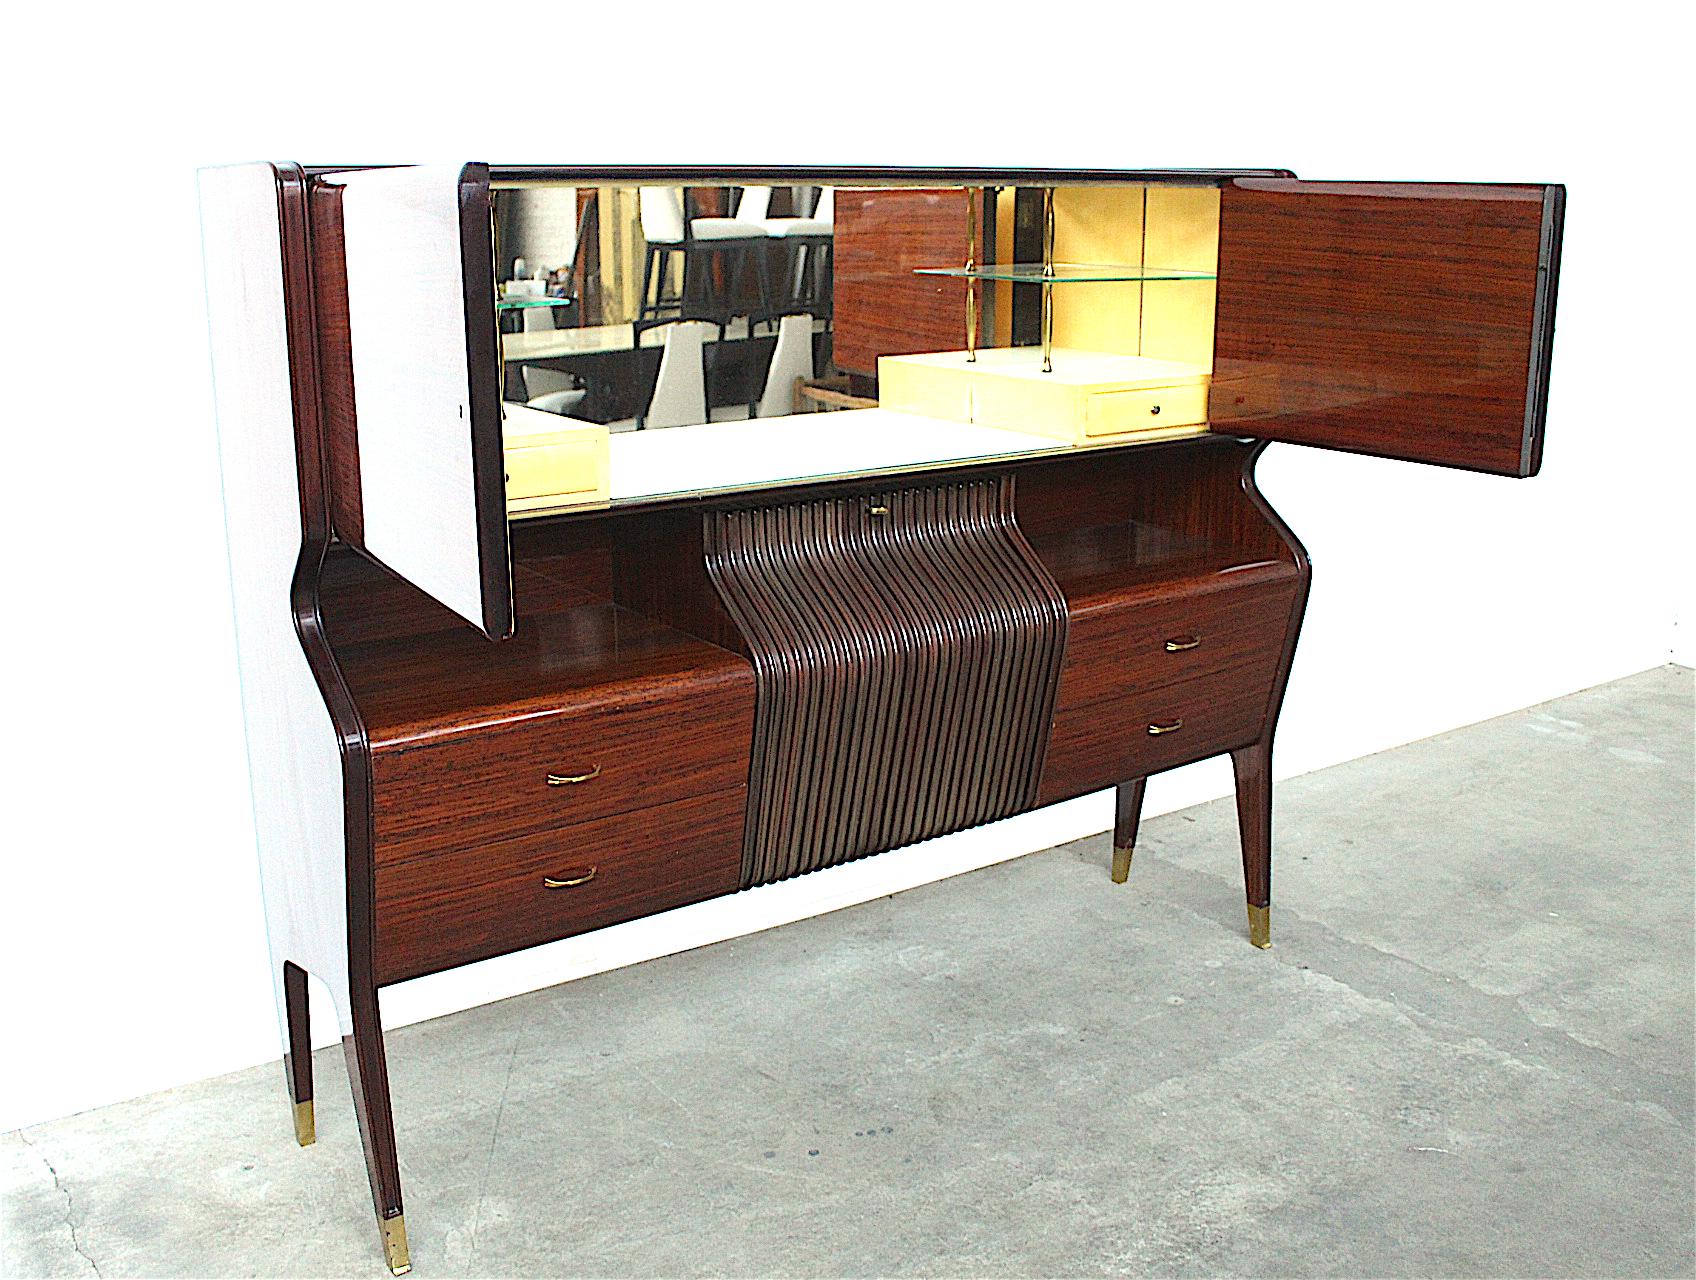 Polished Dry Bar Cabinet Dining Room Service Cupboard or Buffet by Osvaldo Borsani, 1948 For Sale